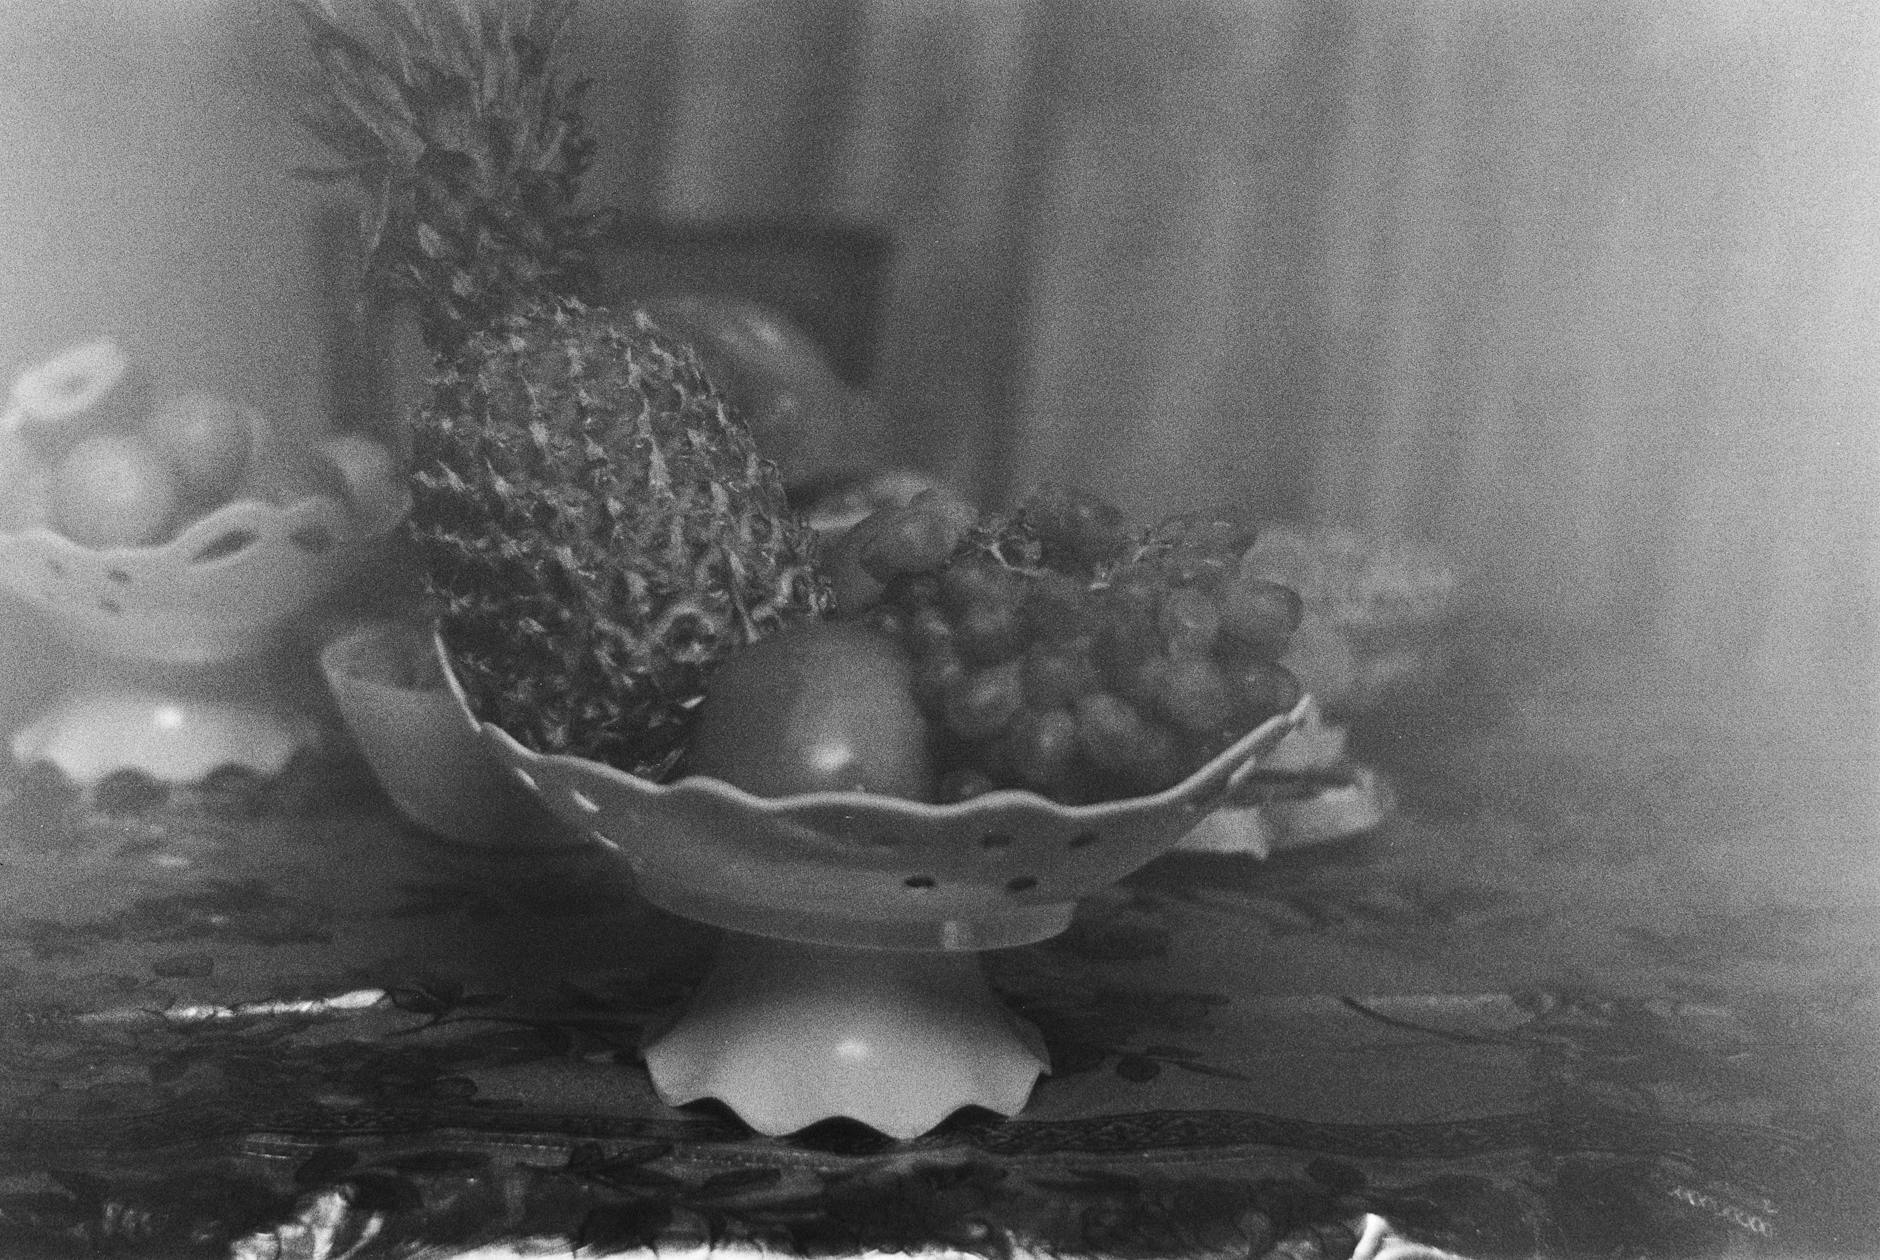 A black and white photograph of fruit in a bowl